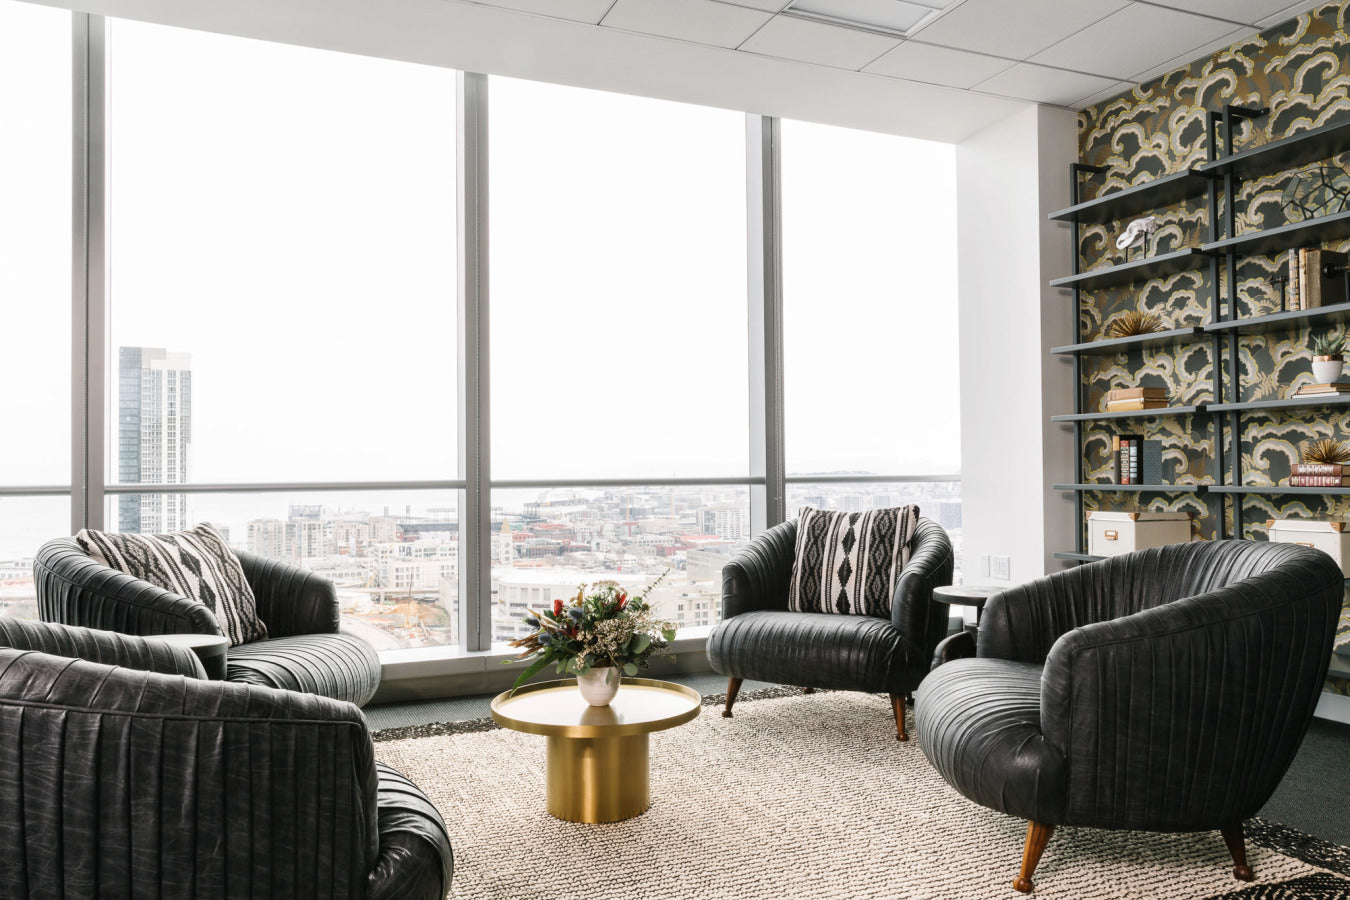 Black Rooster Decor - Homepolish: A High-Rise Office for Trinity Ventures SF - Black Glove Chair